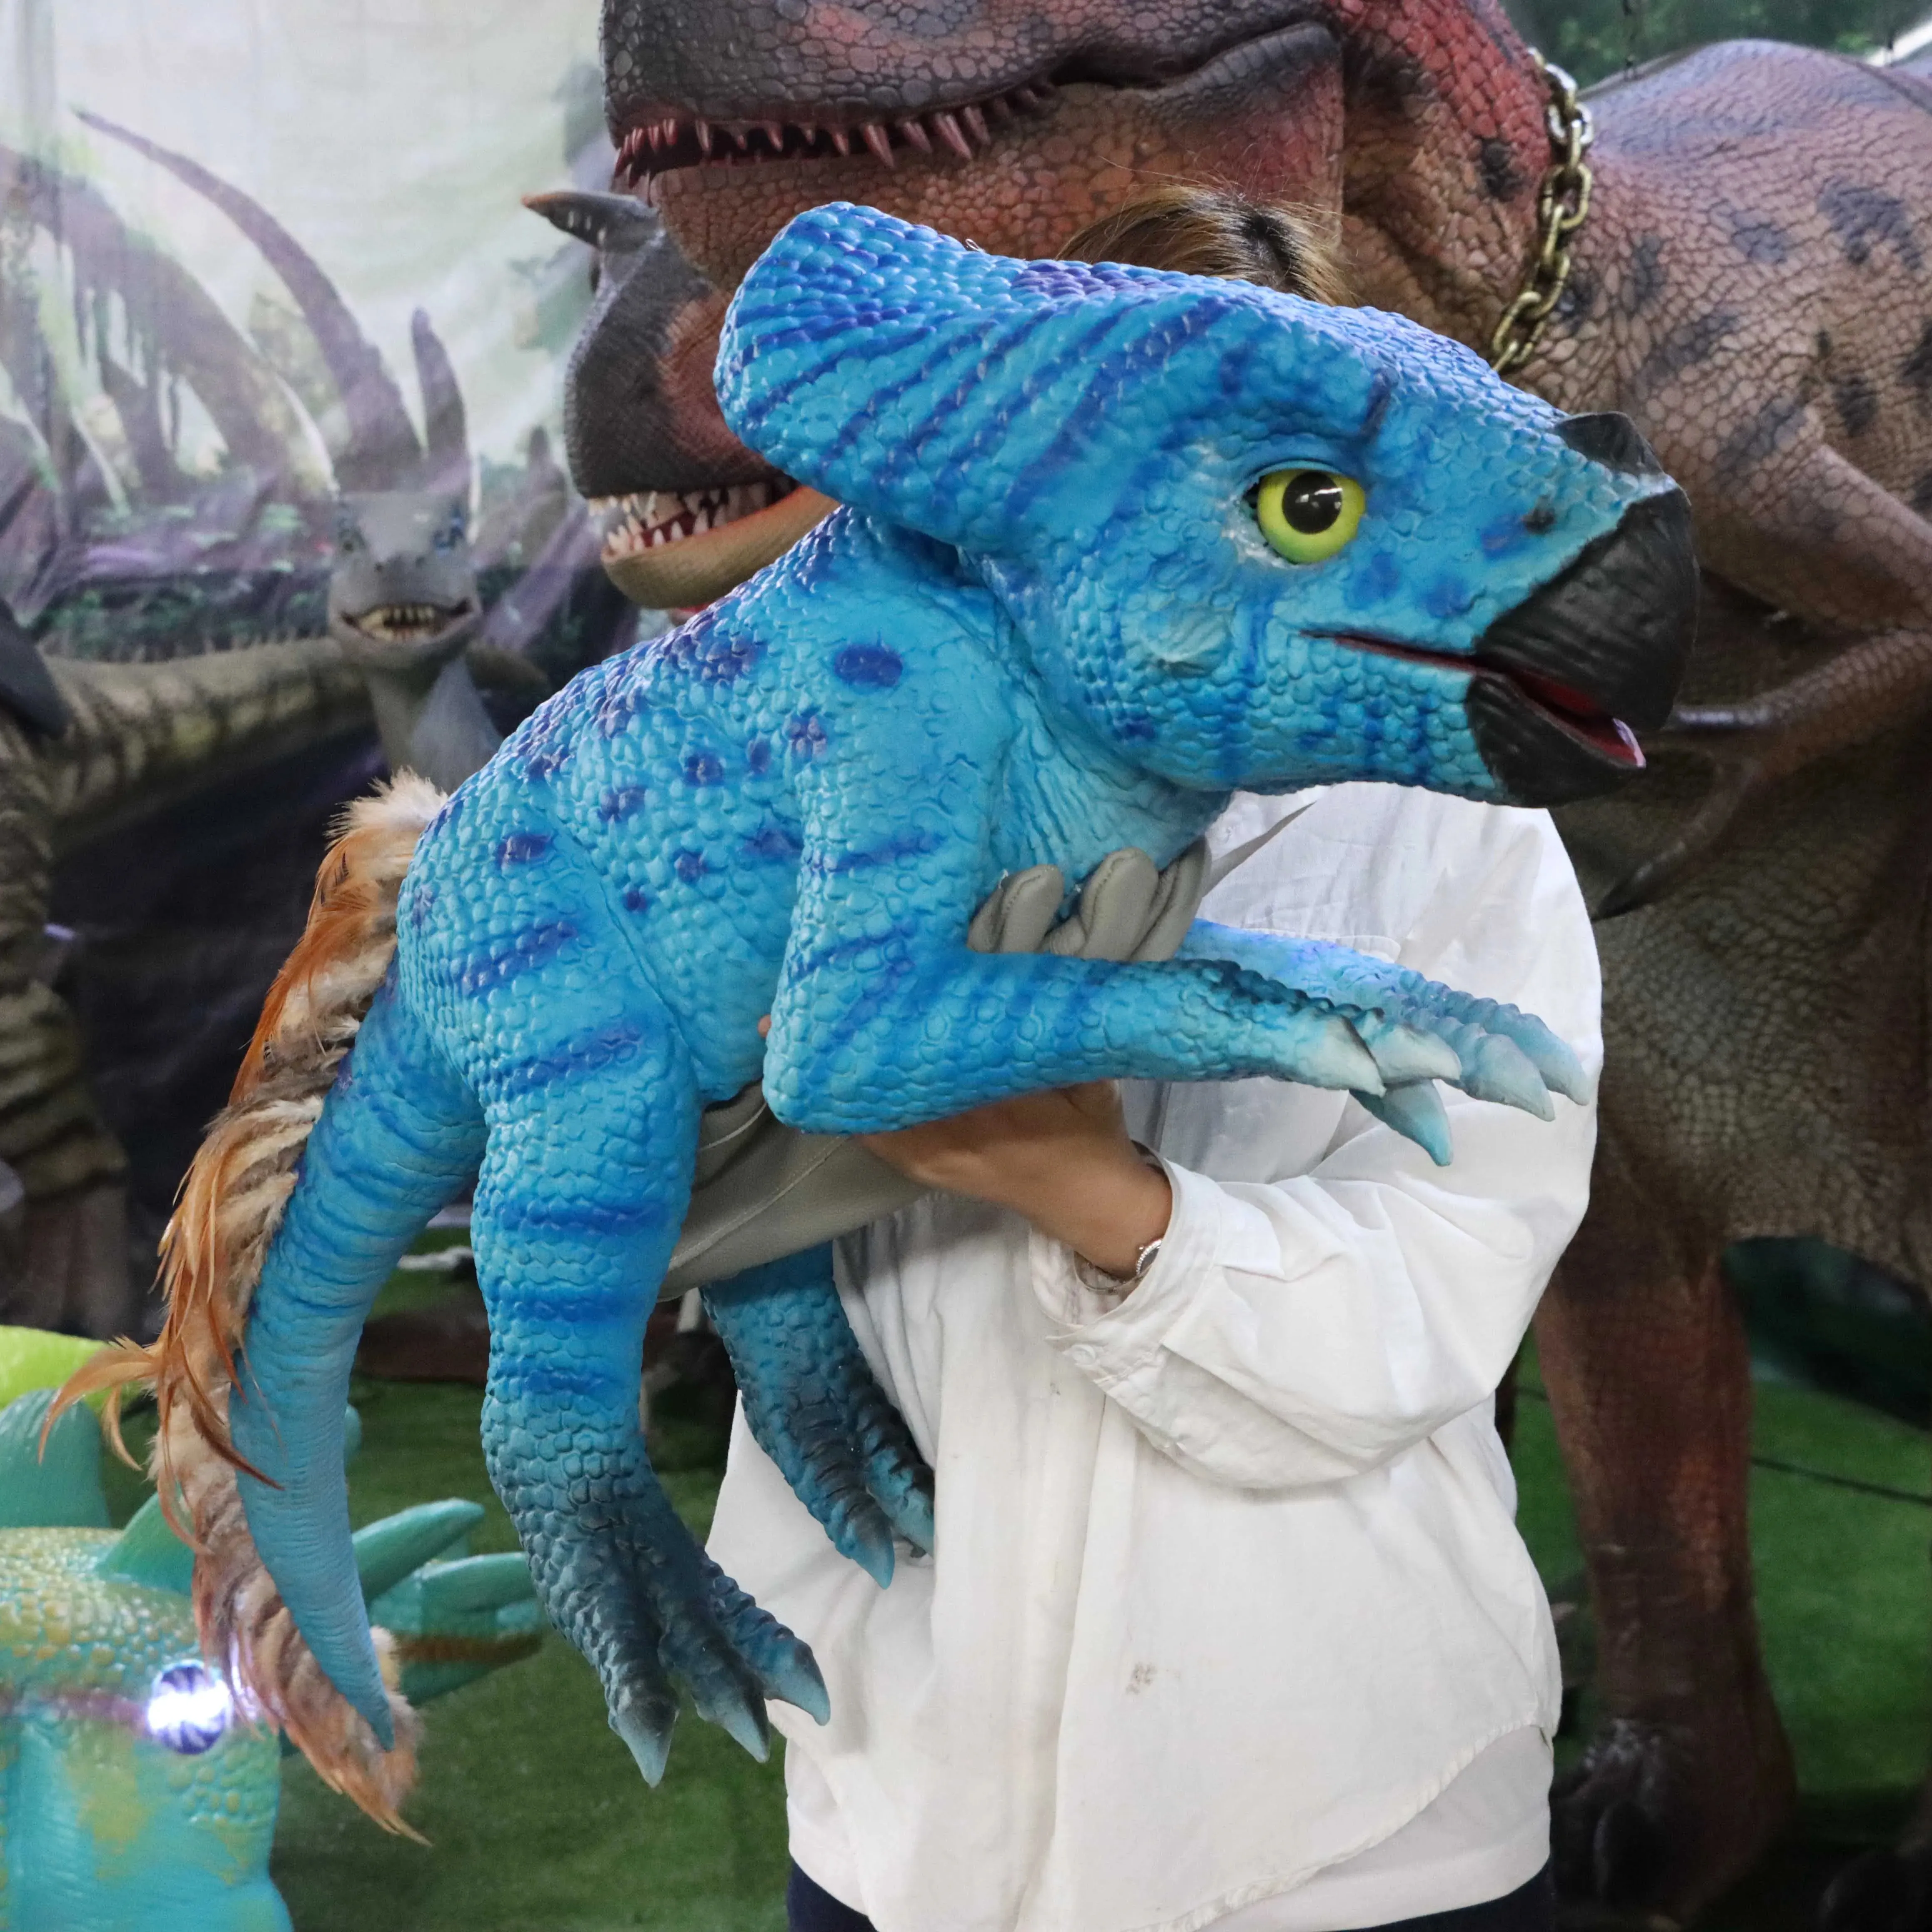 The Most Popular Toy Rubber Dinosaur Puppet Dinosaurios for Sale Supplier Dinosaur Dinosaur Buy